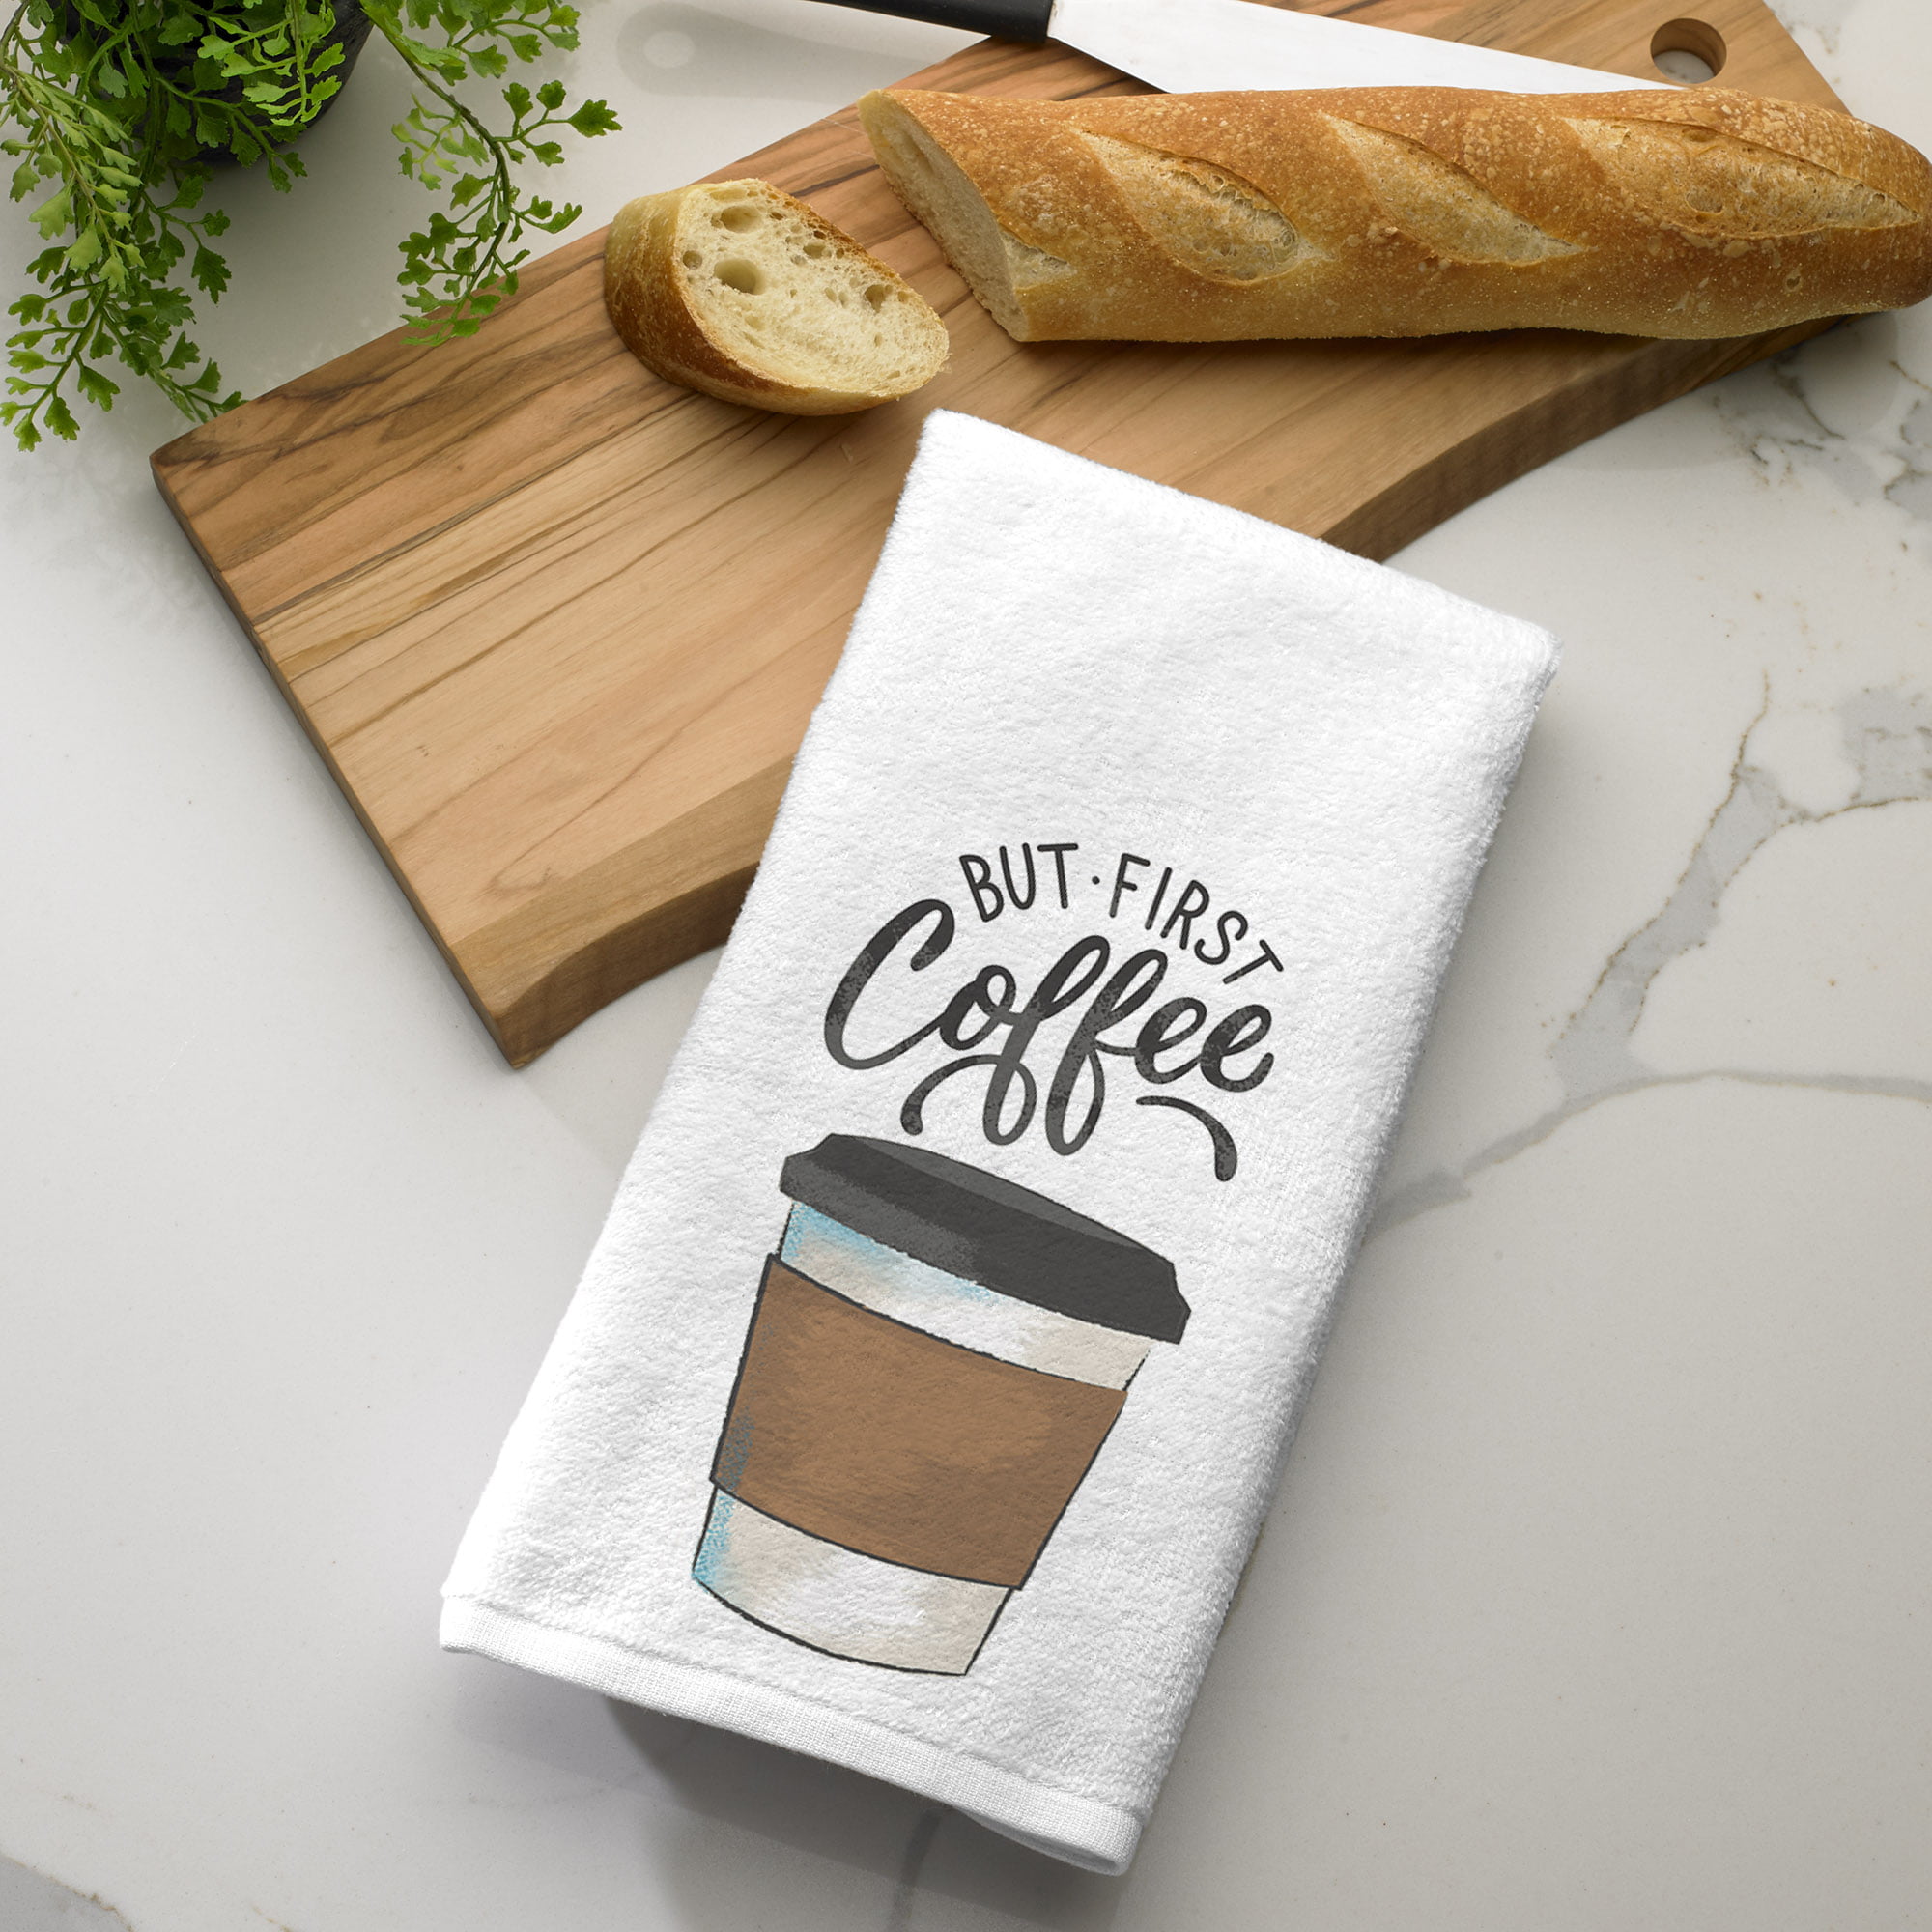 2 SAME COTTON KITCHEN TEA TOWELS (15 x 25) EMBROIDERED COFFEE CUP ON  CREME, HL